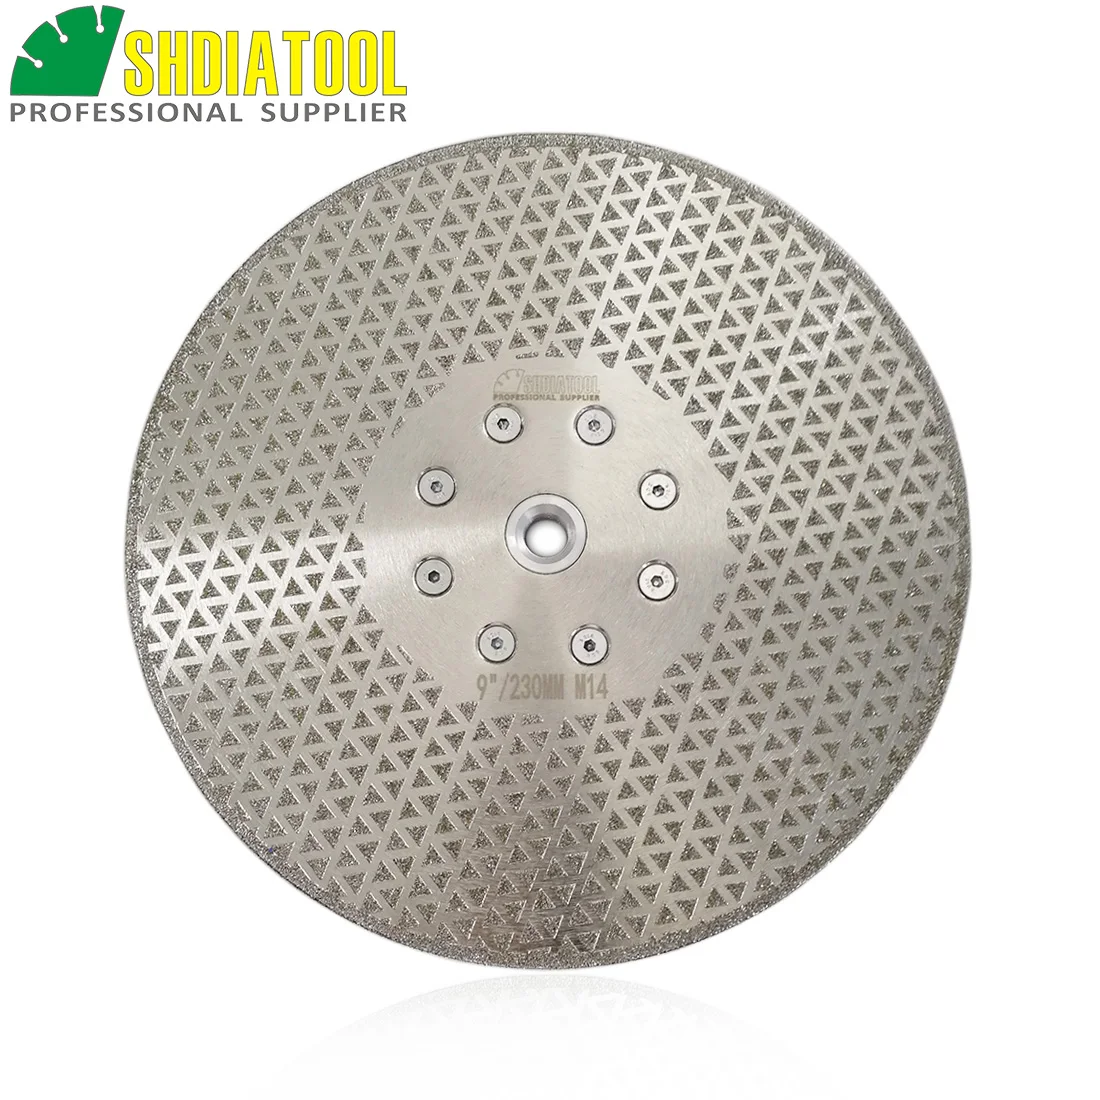 

SHDIATOOL 1pc 9"/230mm M14 Flange Electroplated Diamond Cutting Grinding Discs Granite Marble Double Stone Side Coated Saw Blade